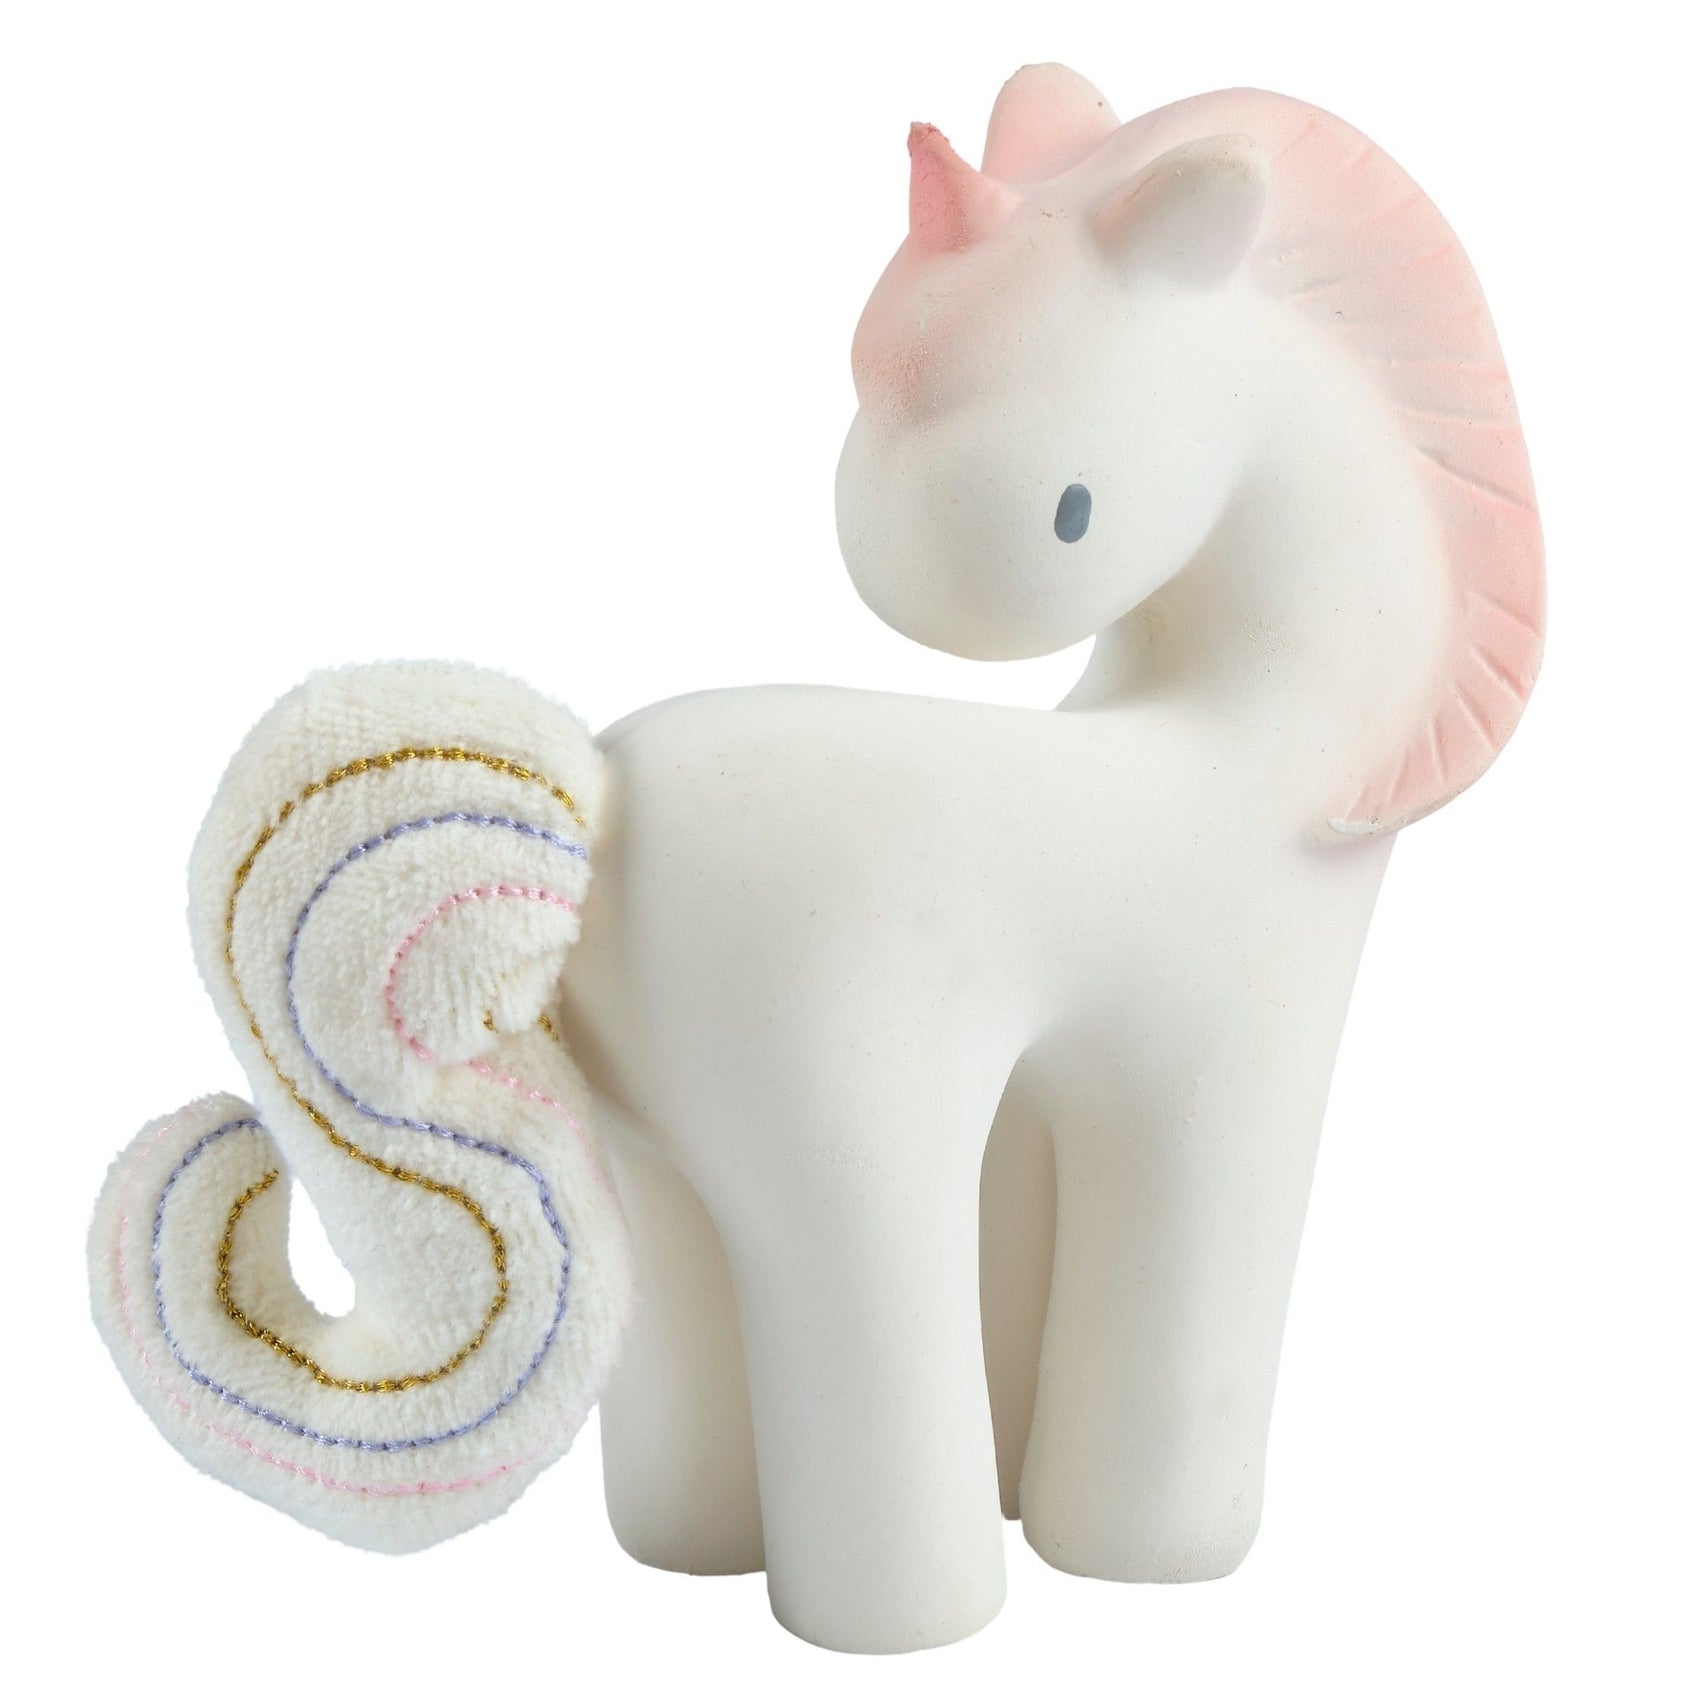 Cotton Candy Unicorn Natural Rubber Rattle with Crinkle Tail - Twinkle Twinkle Little One